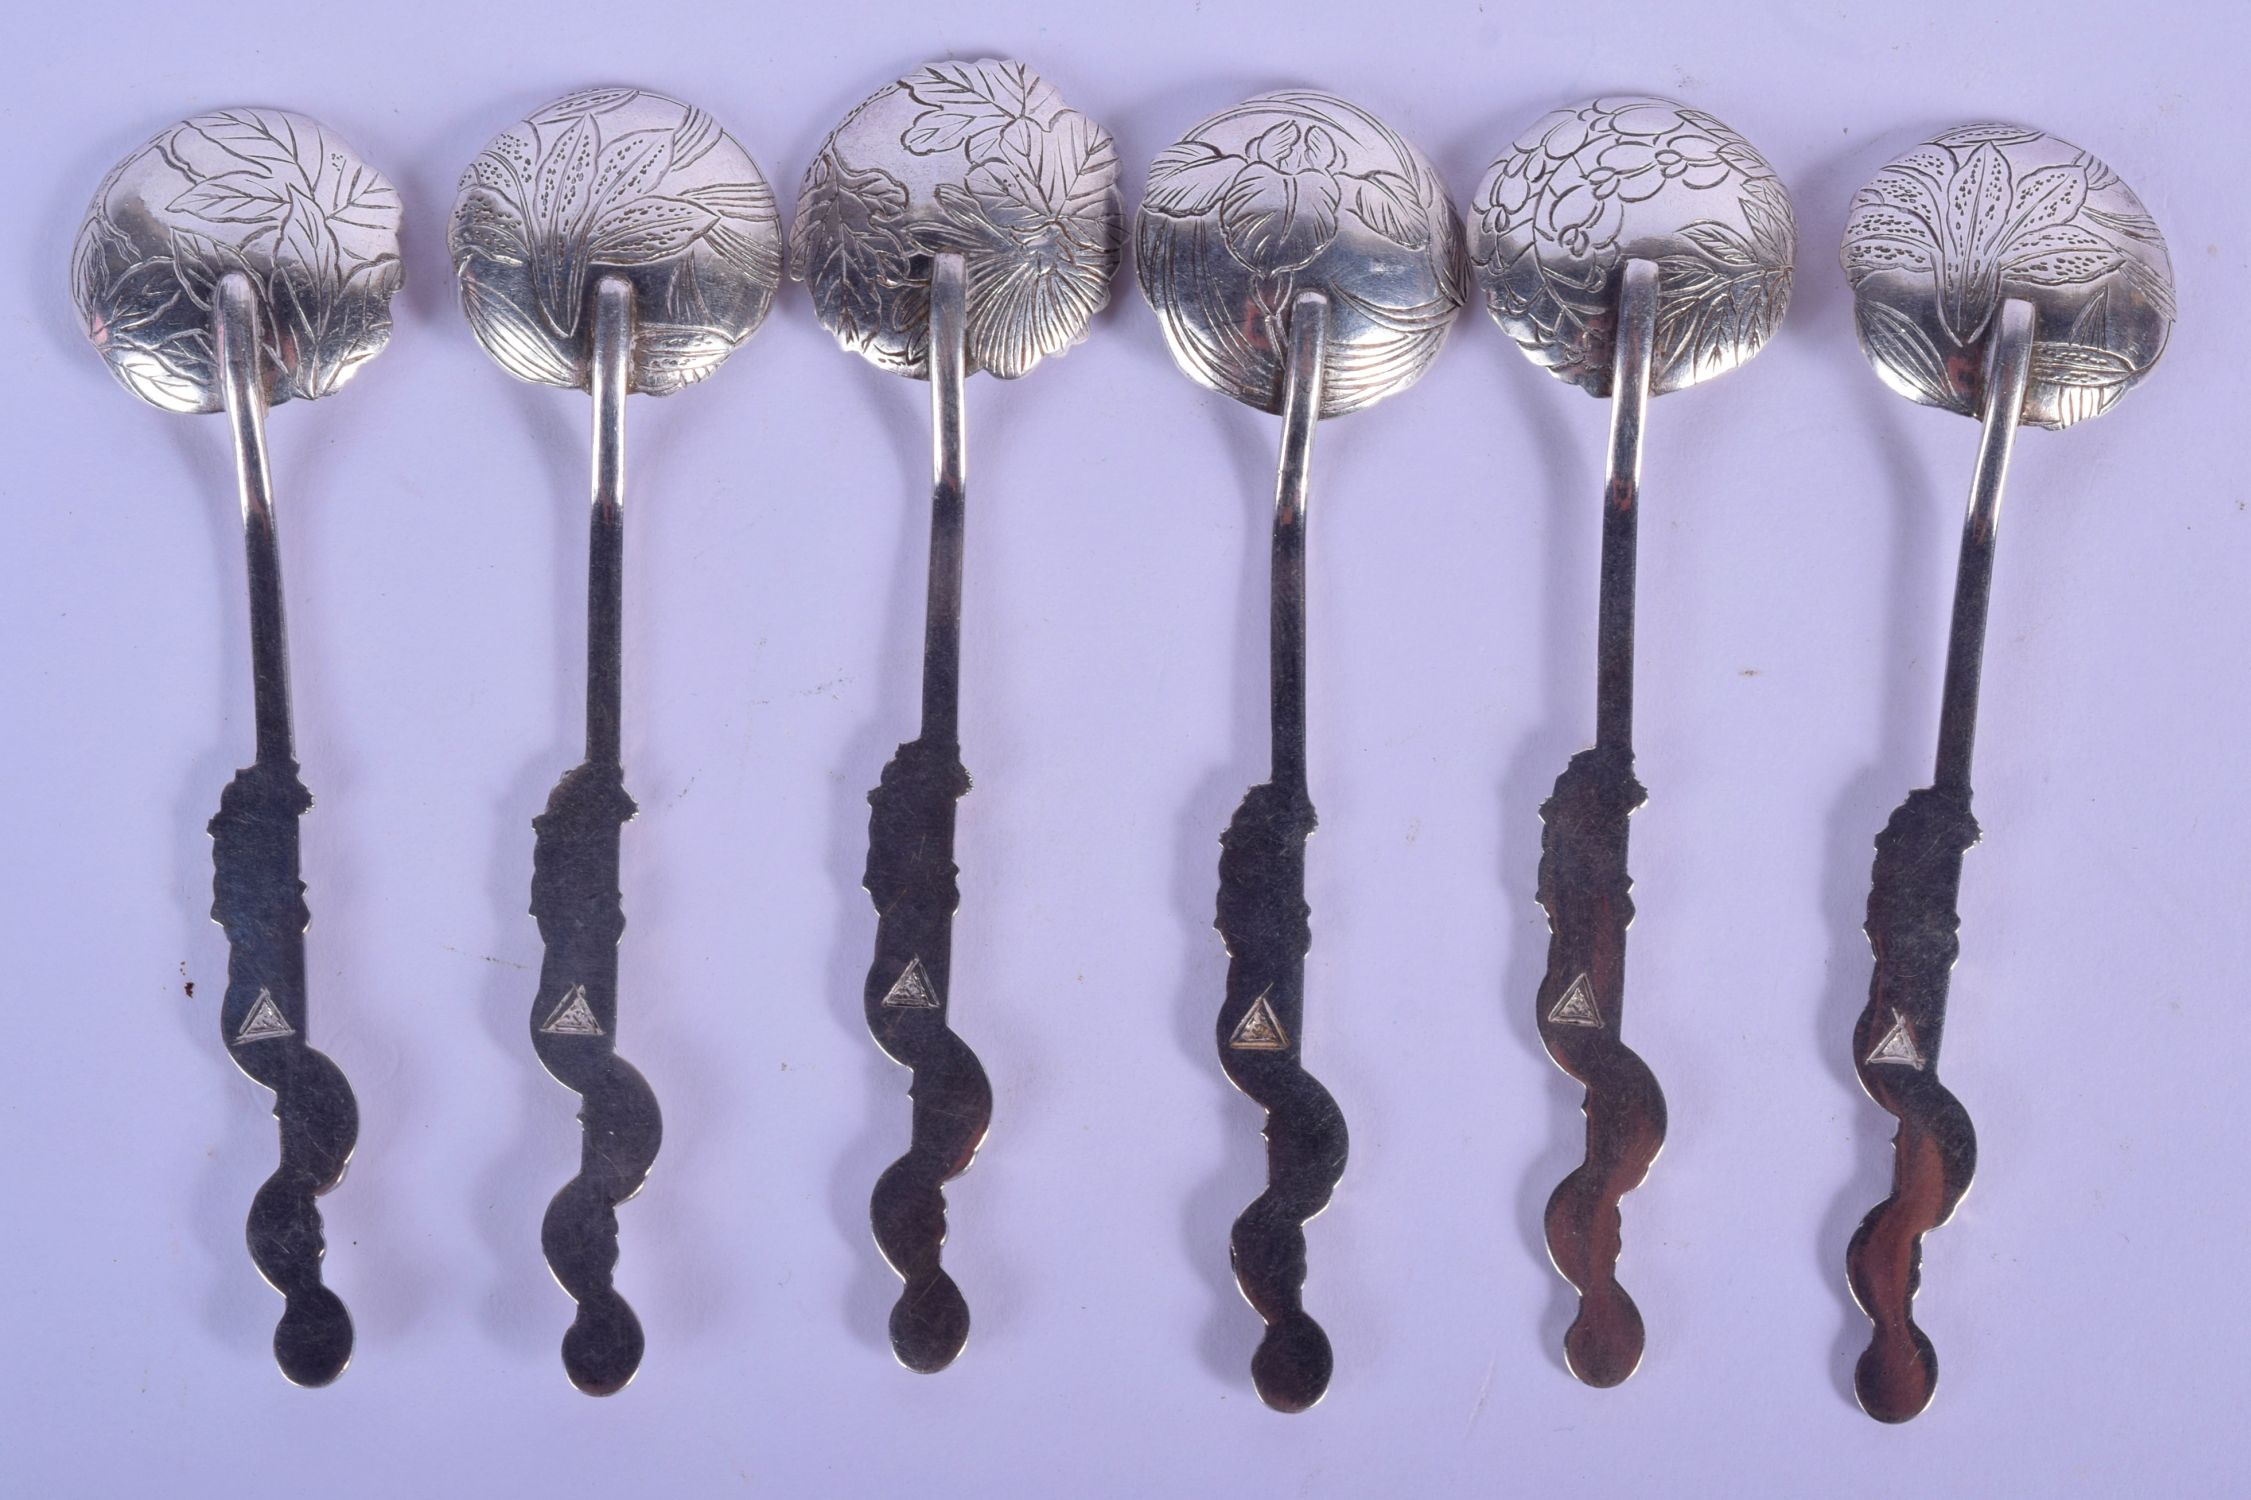 A LOVELY SET OF SIX LATE 19TH CENTURY JAPANESE MEIJI PERIOD SILVER AND ENAMEL SPOONS formed with dra - Image 4 of 5